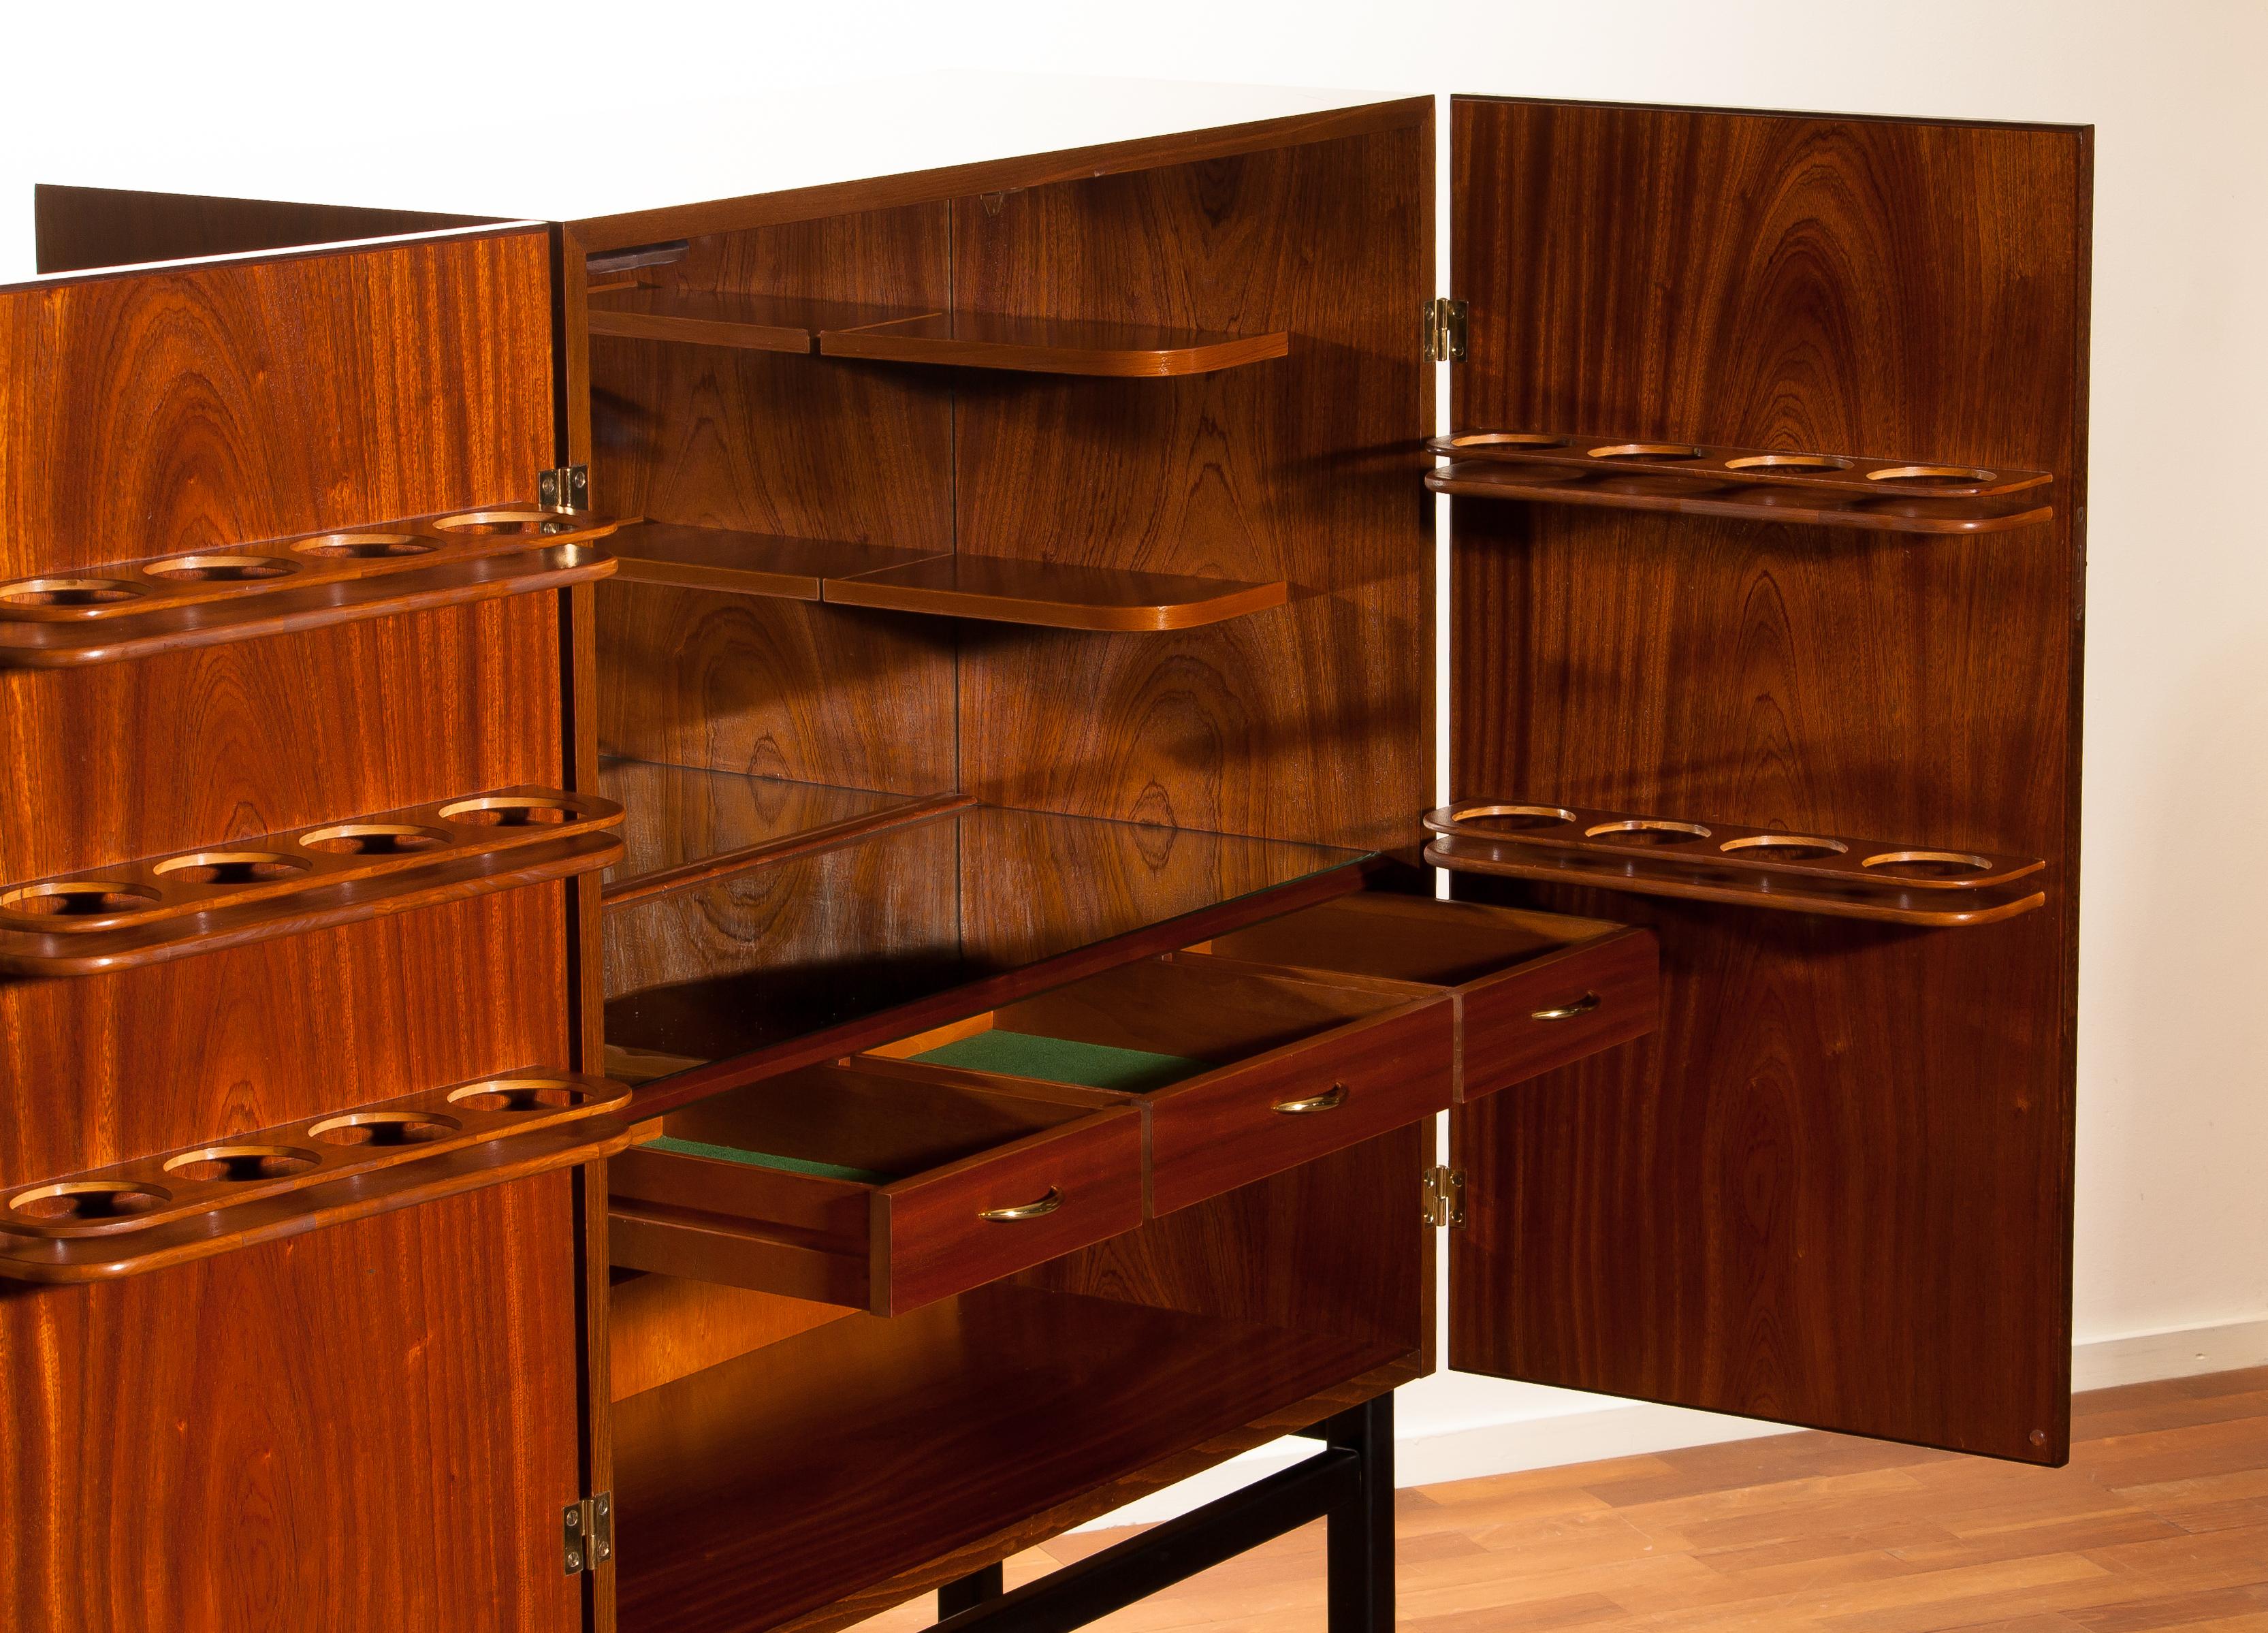 Extremely beautiful and unique dry bar/cocktail cabinet. The cabinet is made of mahogany inside and outside. This high-quality cabinet is made by Förenade Möbelfabrikerna Linköping and dated/ labeled/signed 4 May 1968.
Inside the dry bar cabinet,